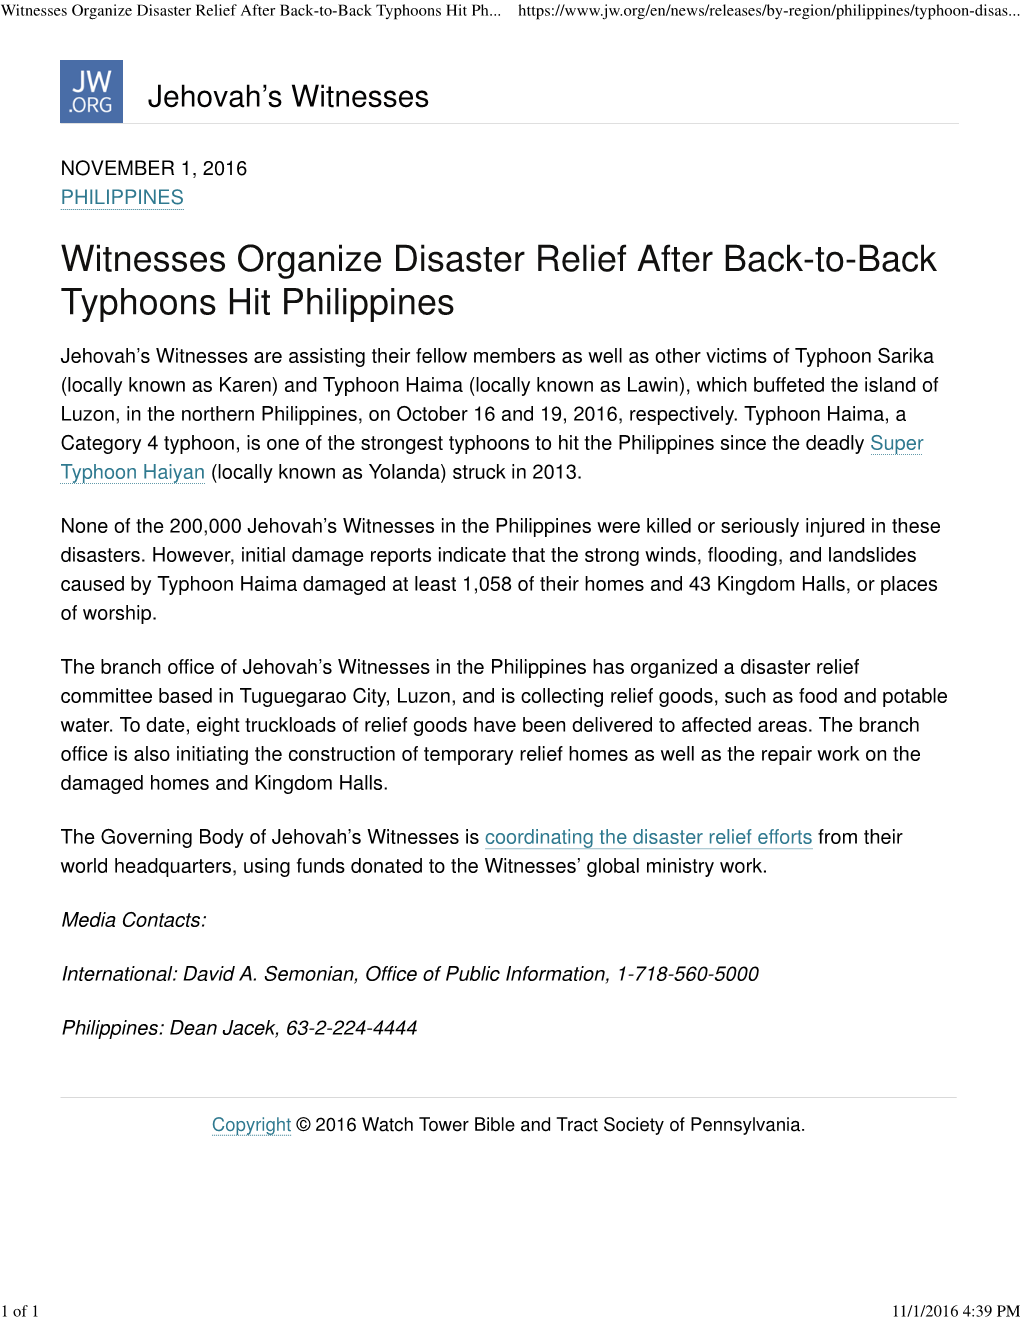 Witnesses Organize Disaster Relief After Back-To-Back Typhoons Hit Ph